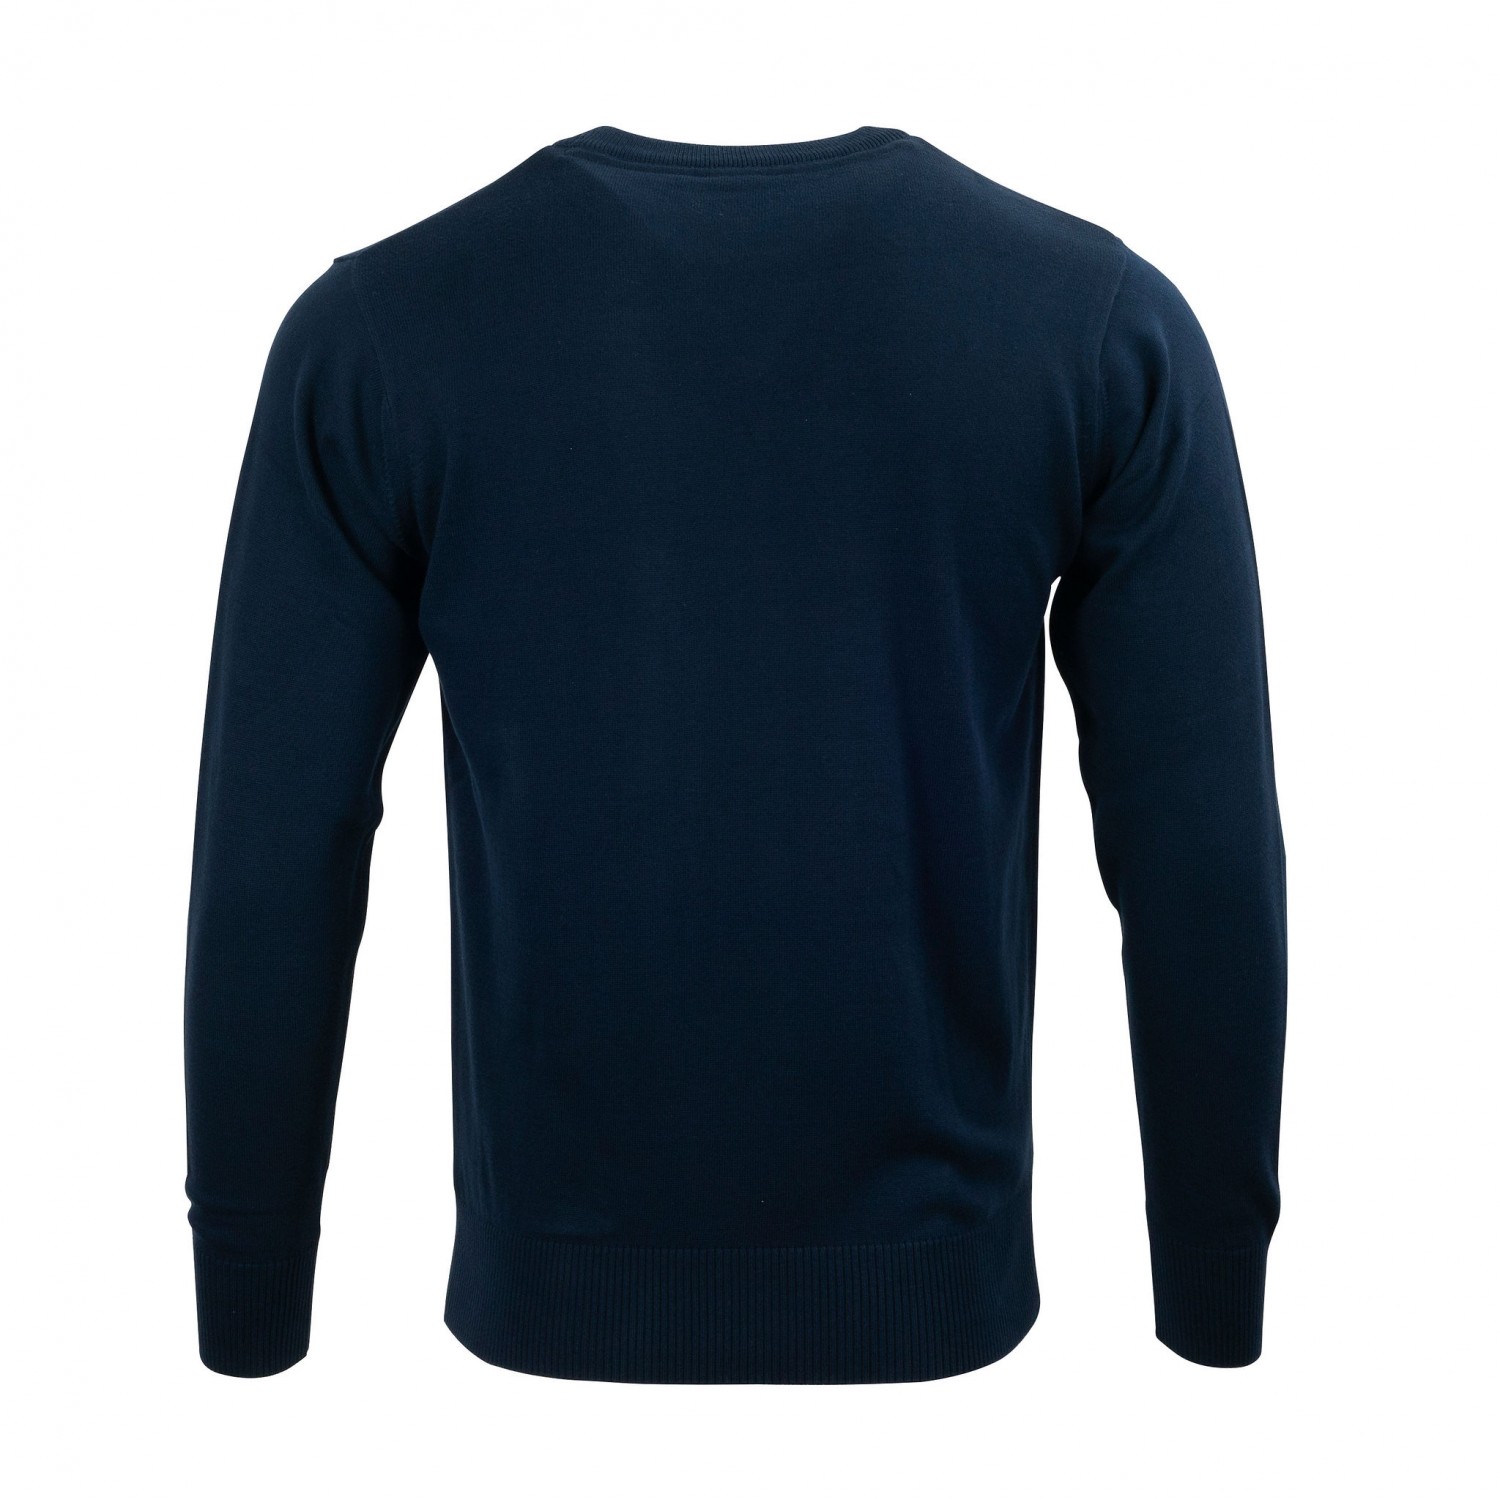 Coventry Navy Knitted Crew Neck Jumper - Adult